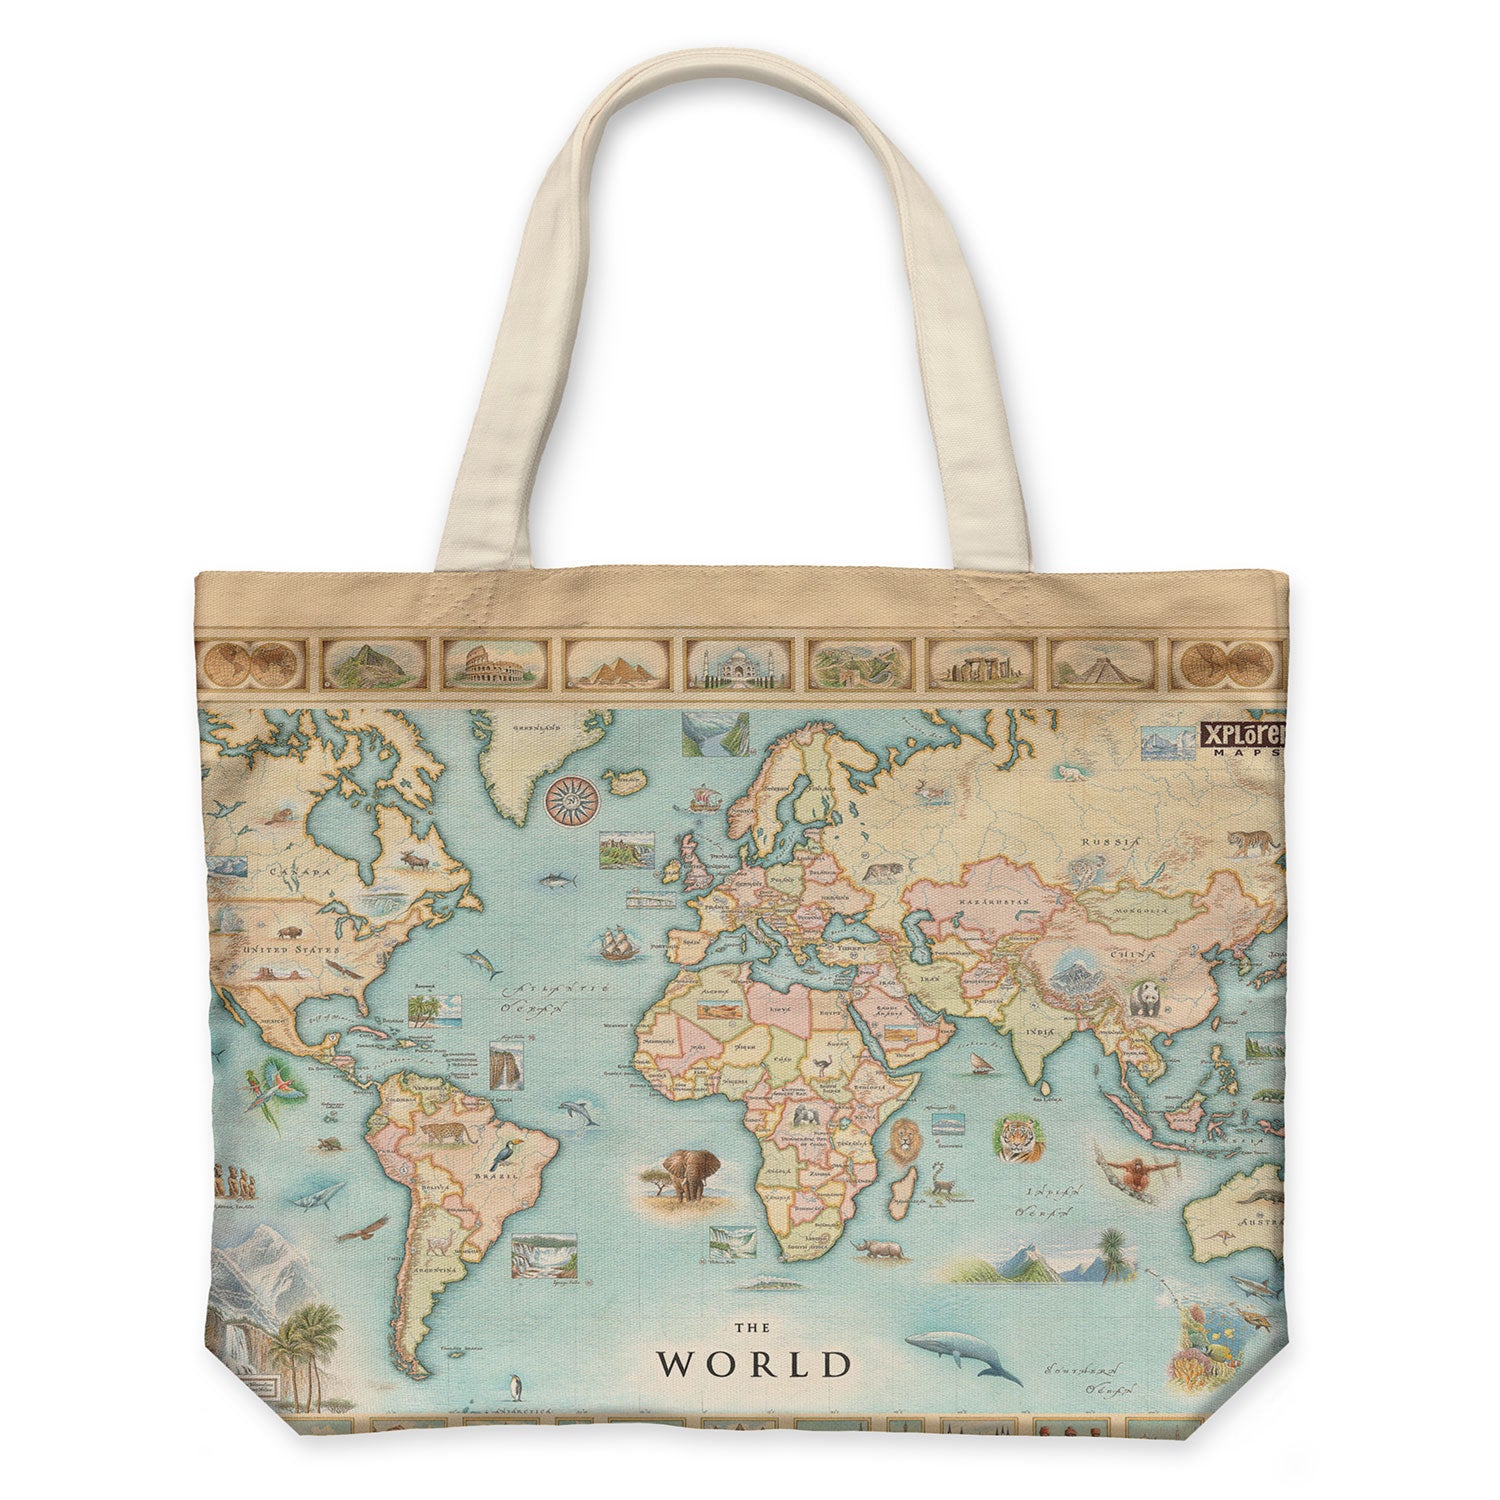 World Map Canvas Tote Bags by Xplorer Maps. The map features the entire world with illustrations of significant places and major flora and fauna. Some places include Machu Pichu, the Eiffel Tower, Mount Everest, and Easter Island.